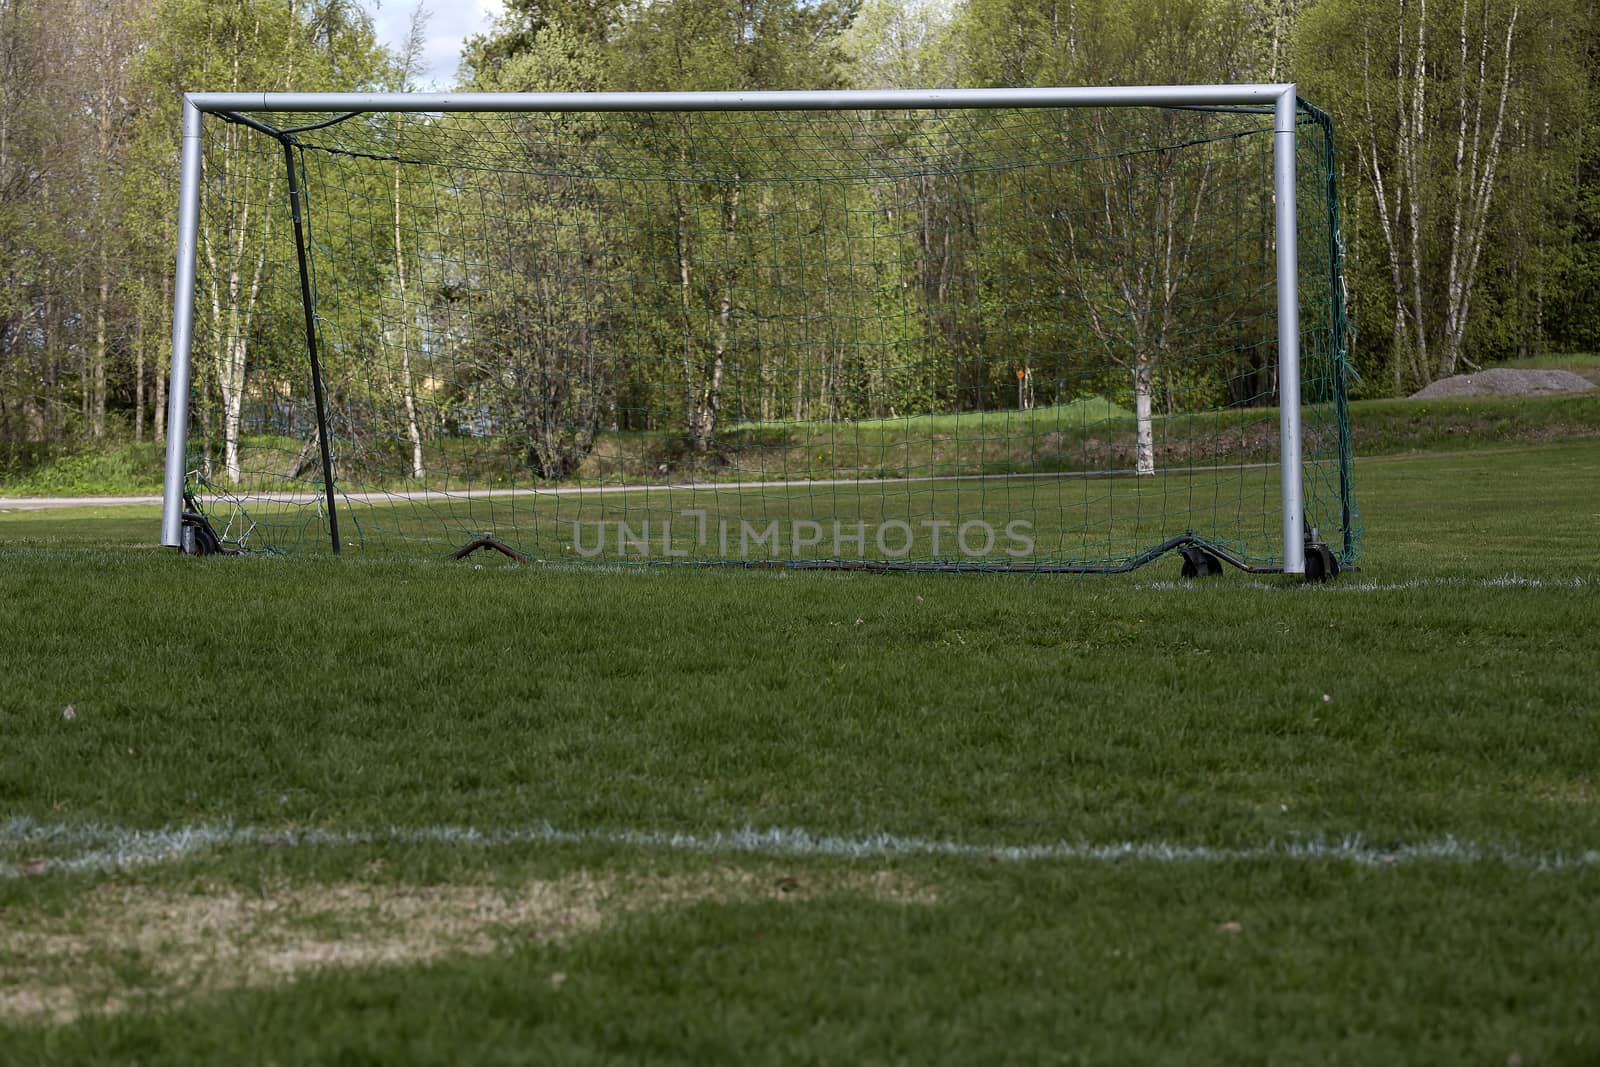 An empty soccer goal from a low perspective with some trees in the background